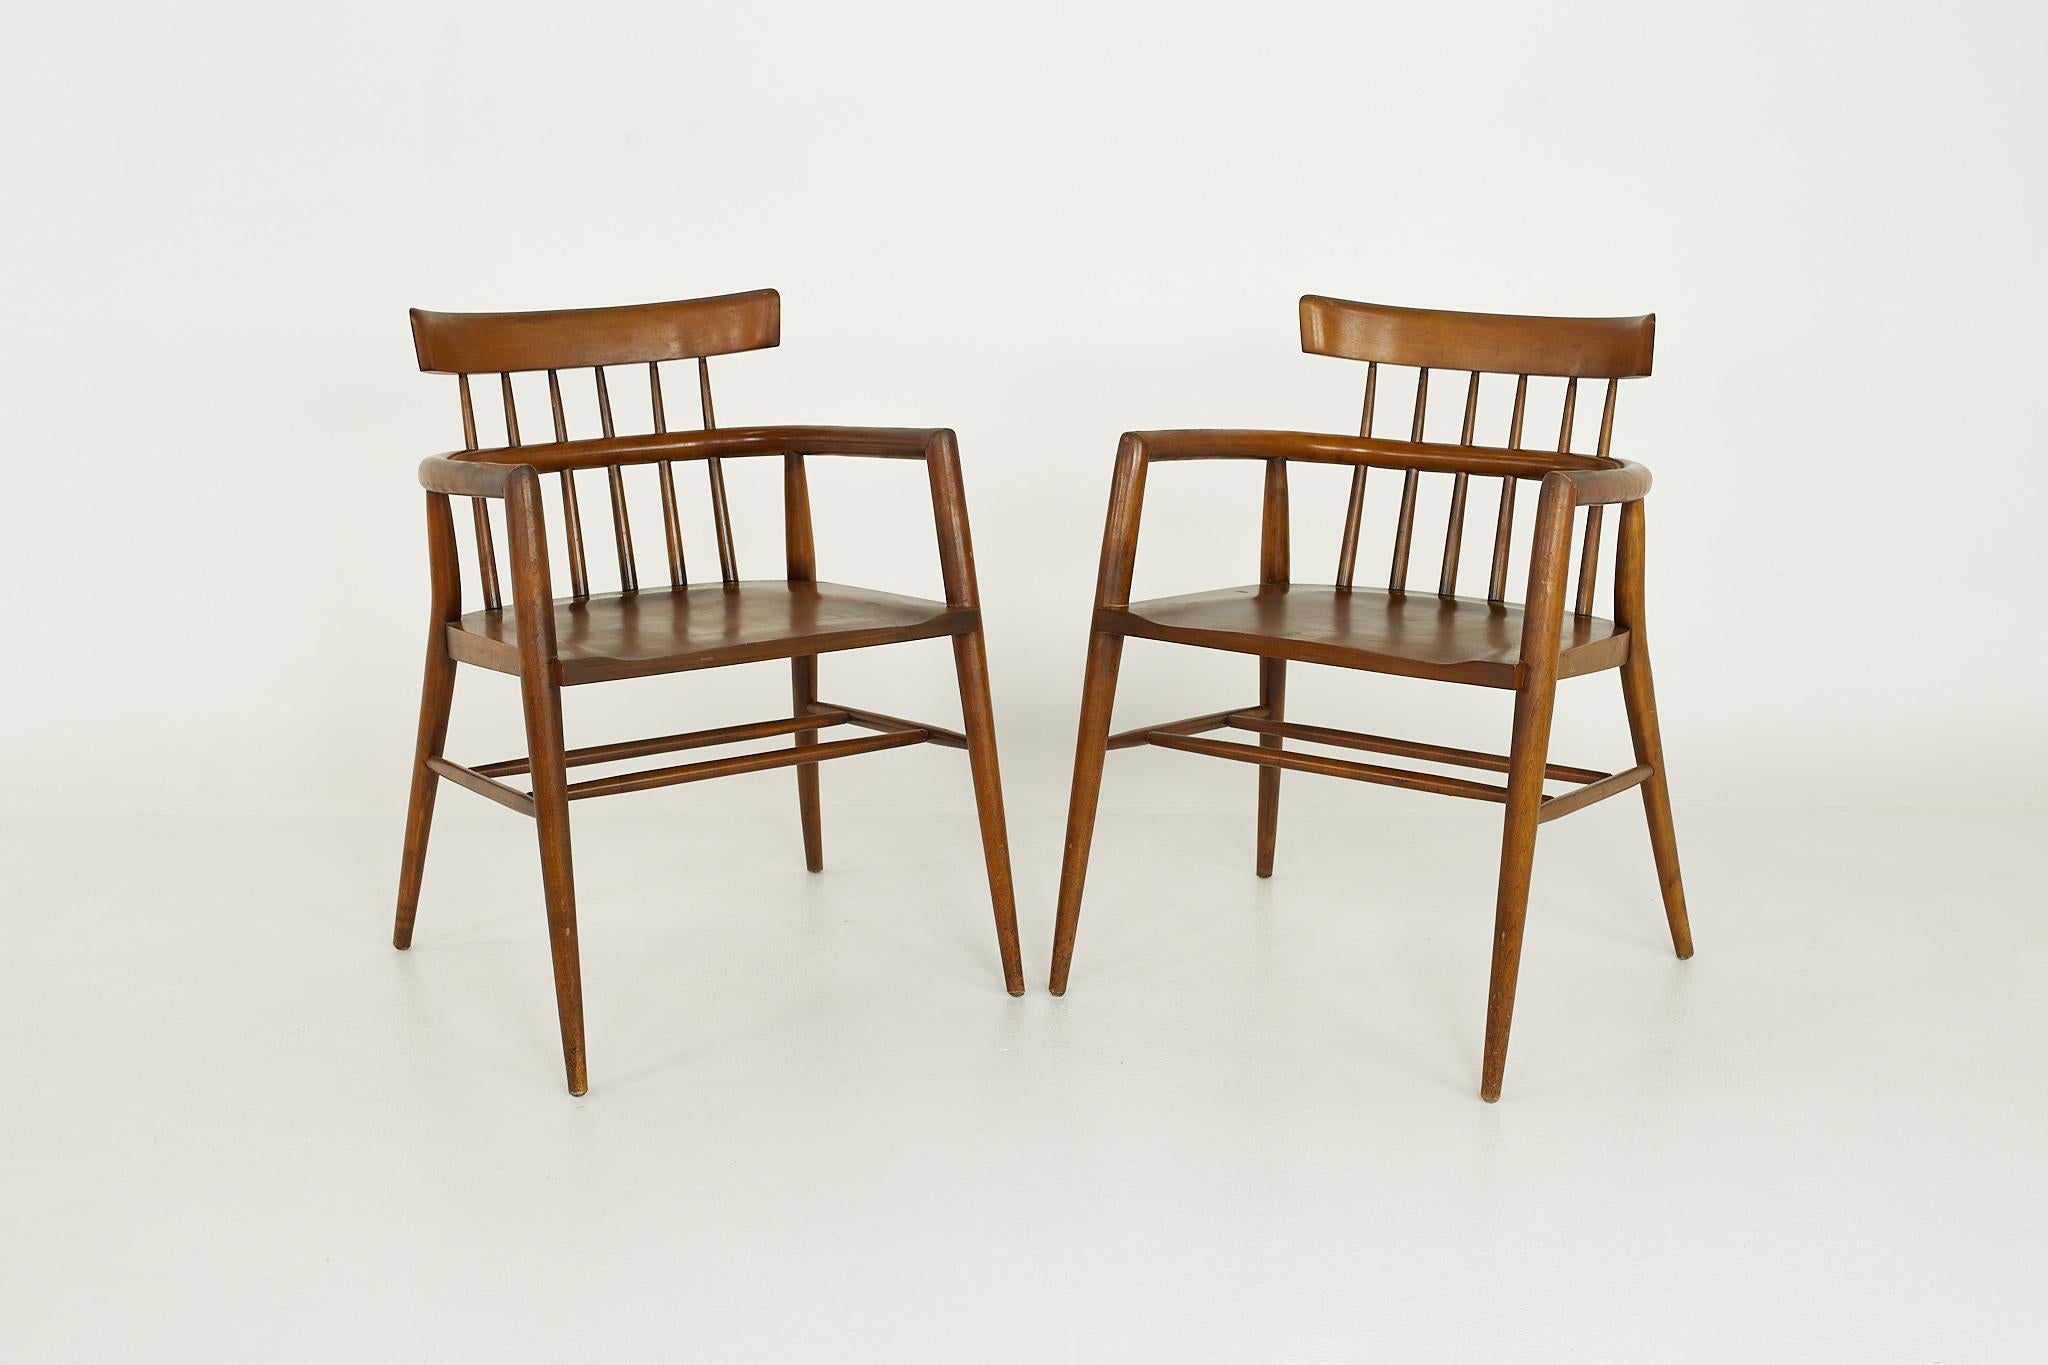 Wood Paul McCobb Planner Group Mid Century Dining Chairs, Set of 6